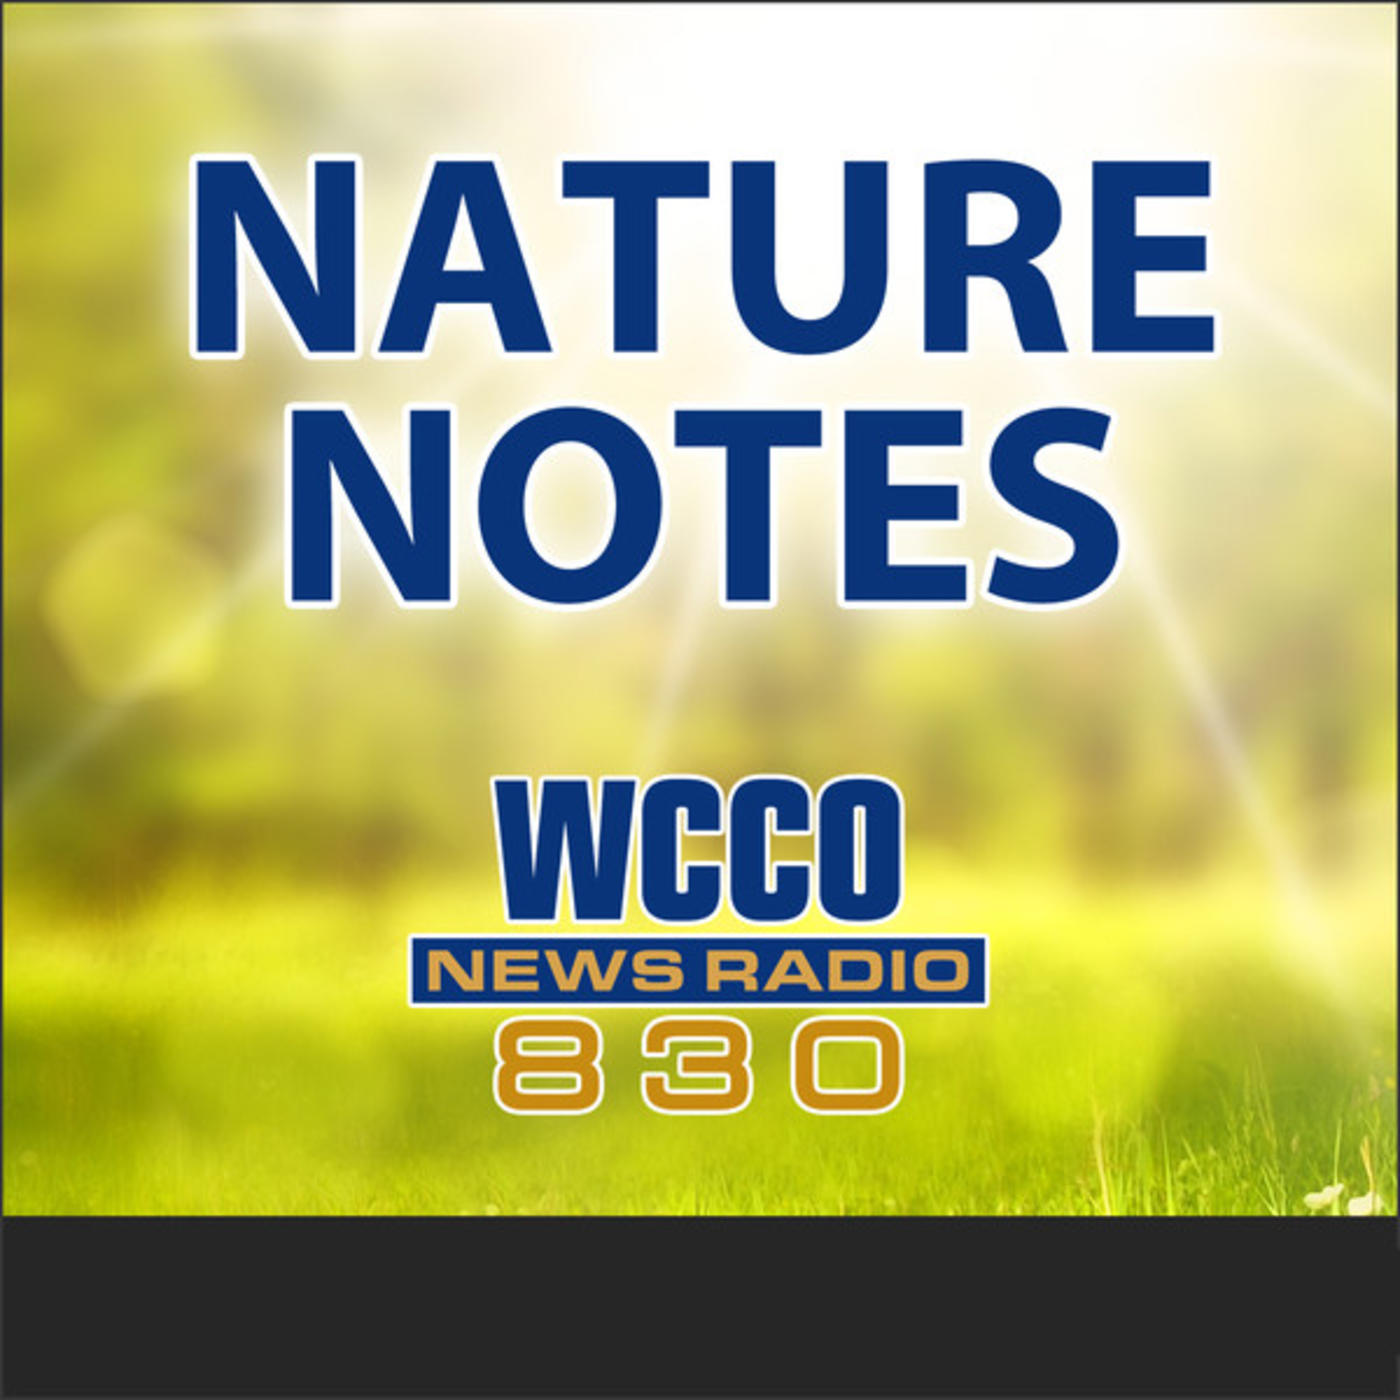 07-15-18 Nature Notes